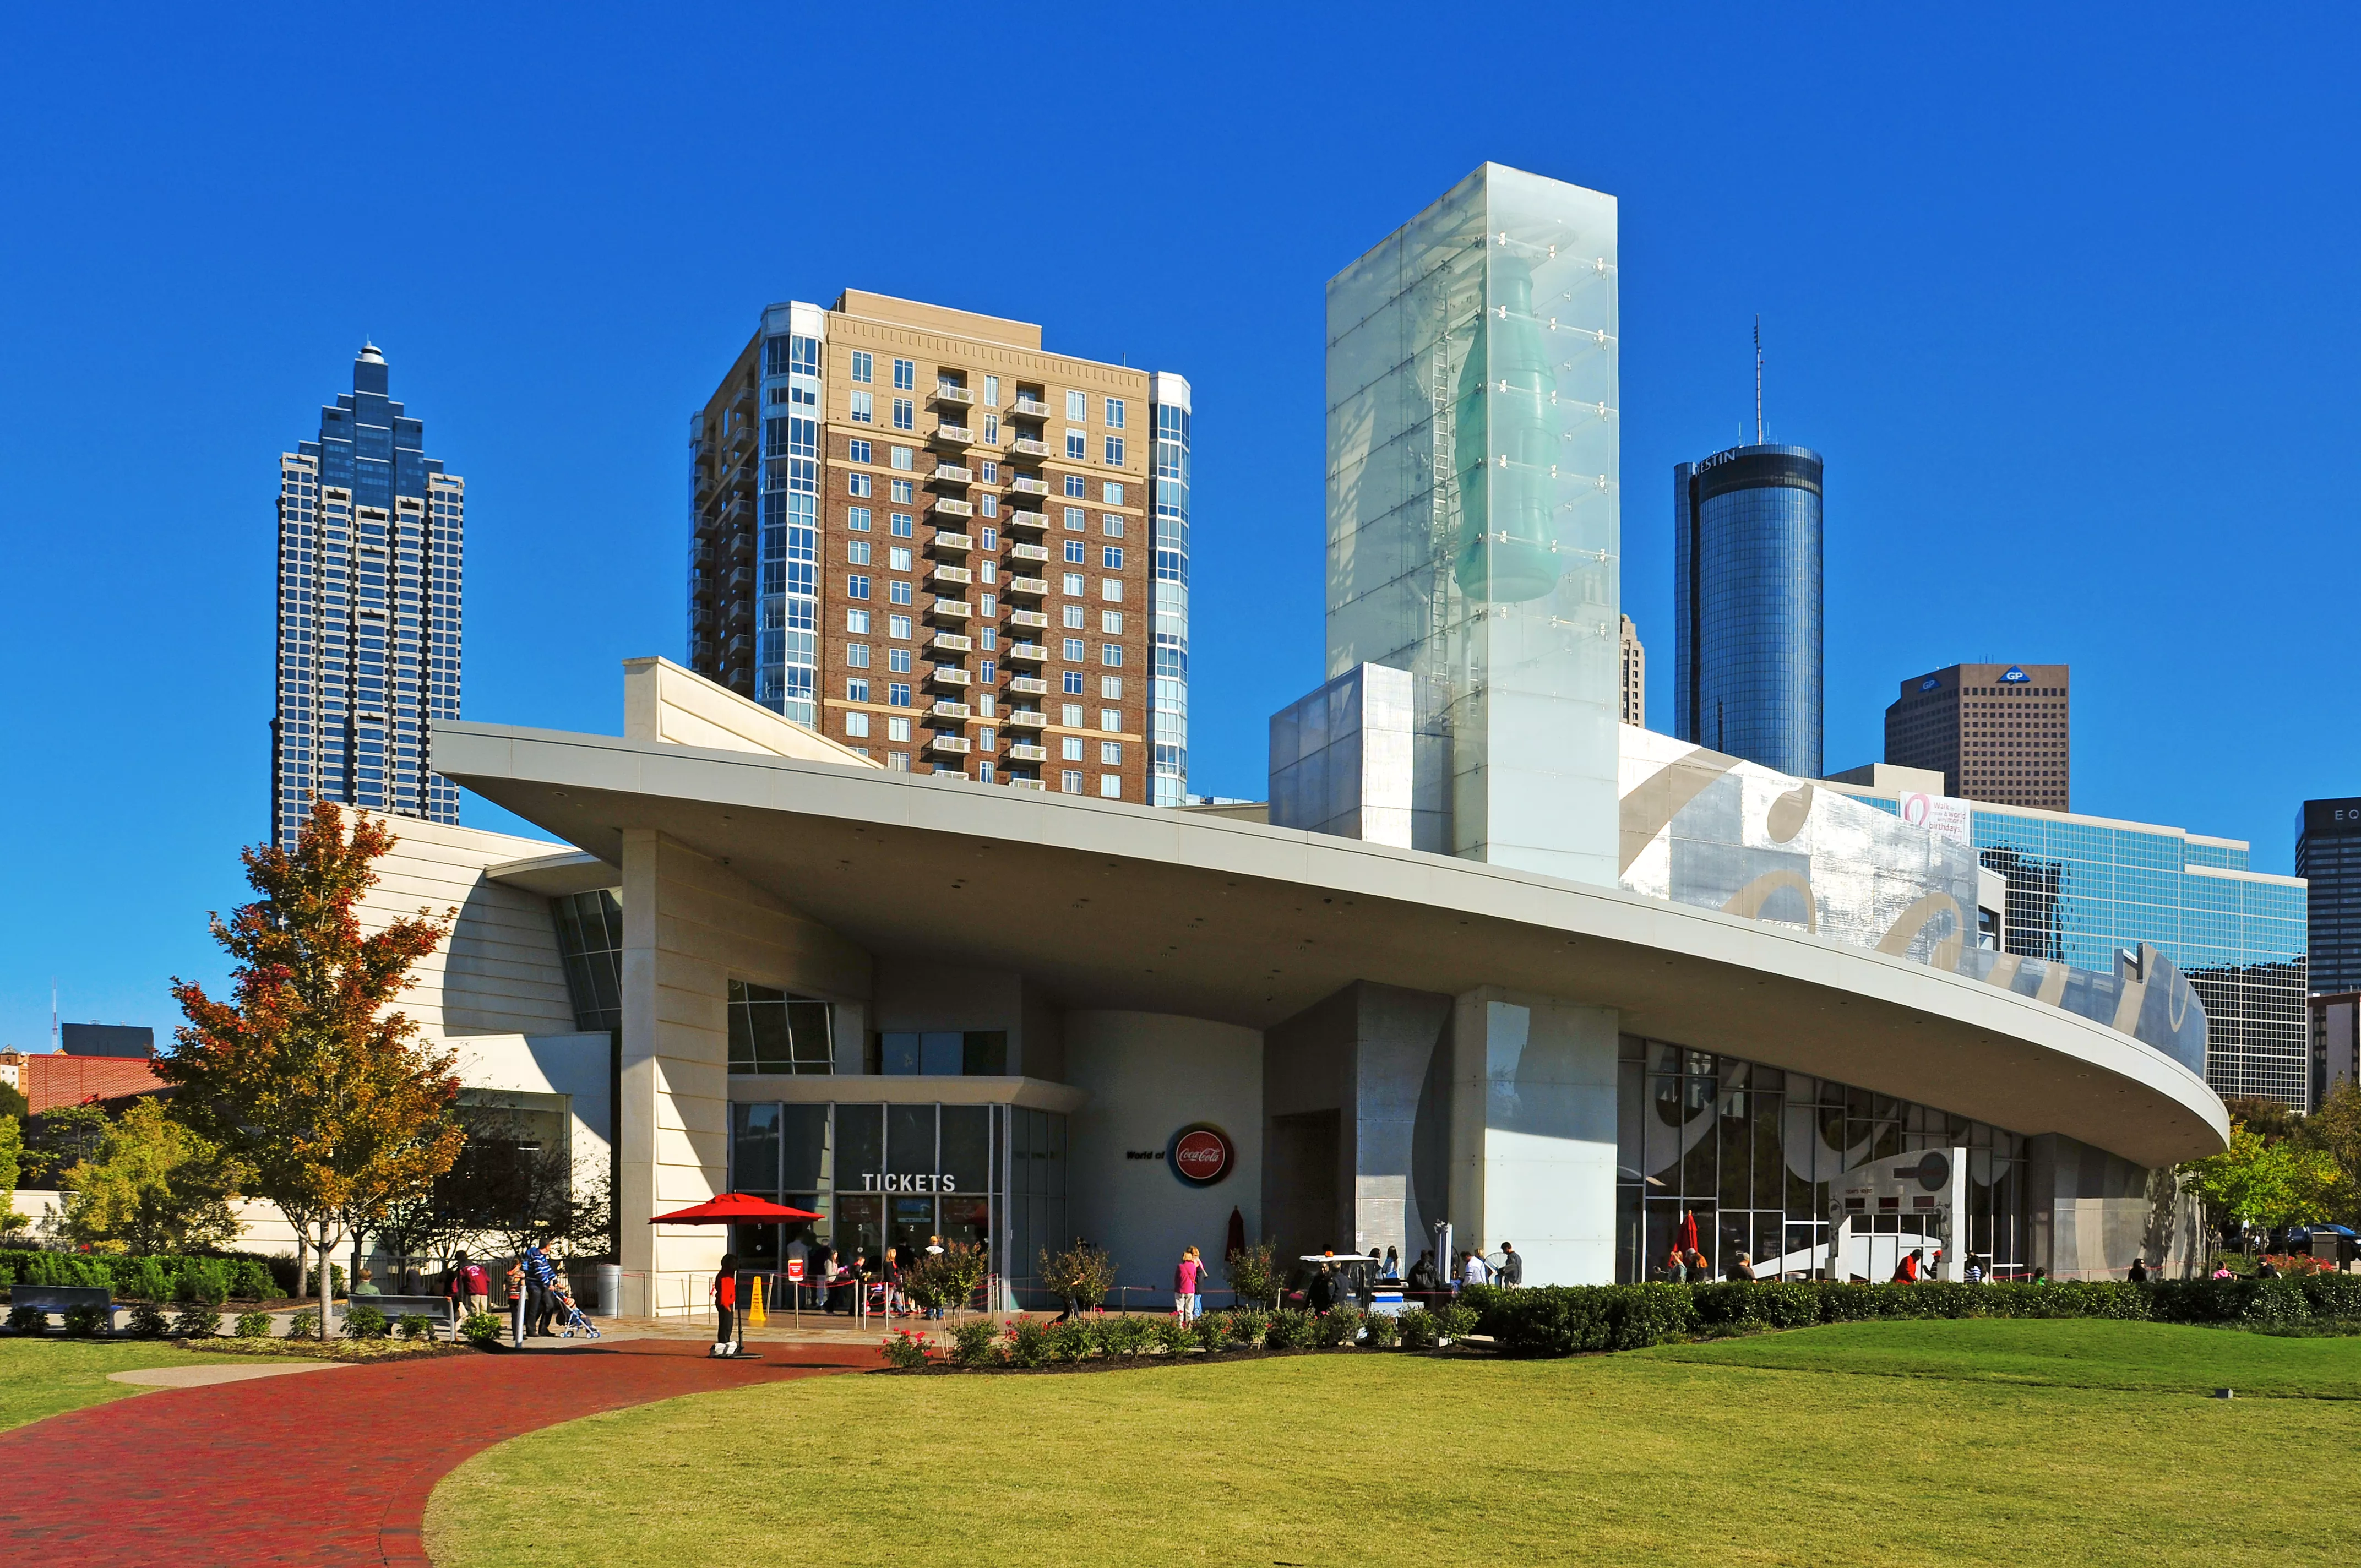 The New World of Coca-Cola in USA, North America | Museums - Rated 3.6